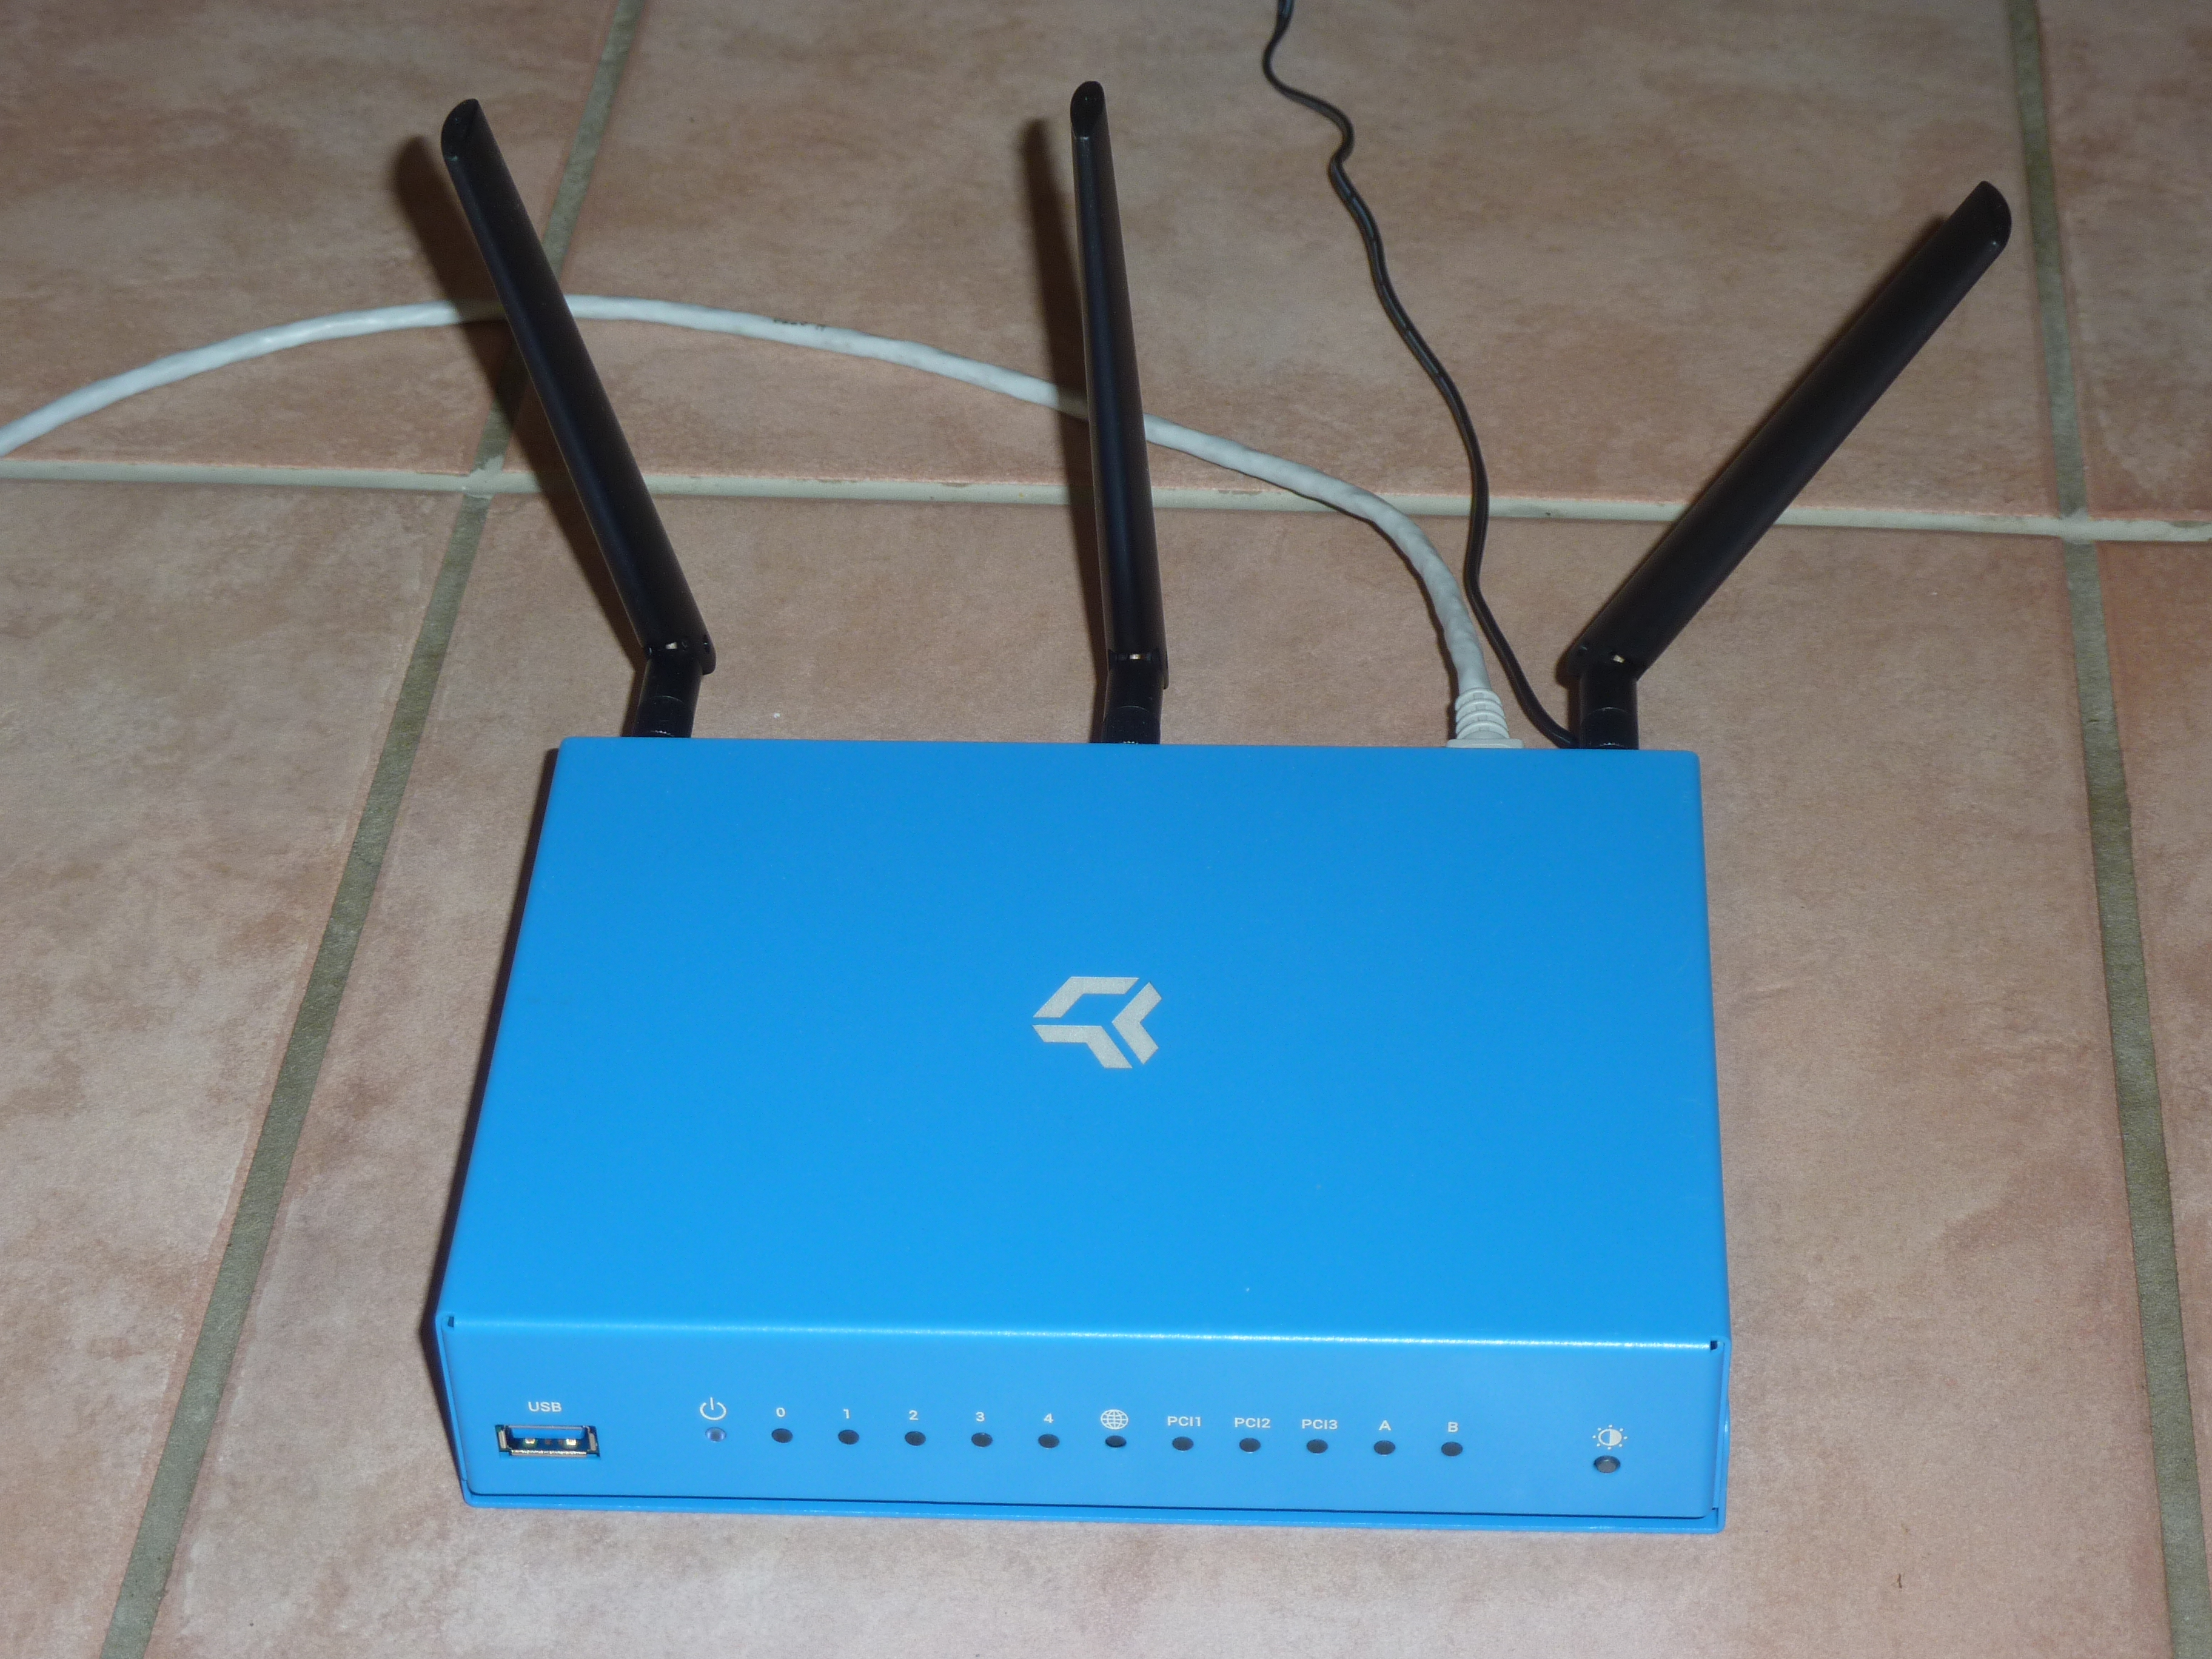 File:Turris Omnia router plugged in.jpg - Wikimedia Commons